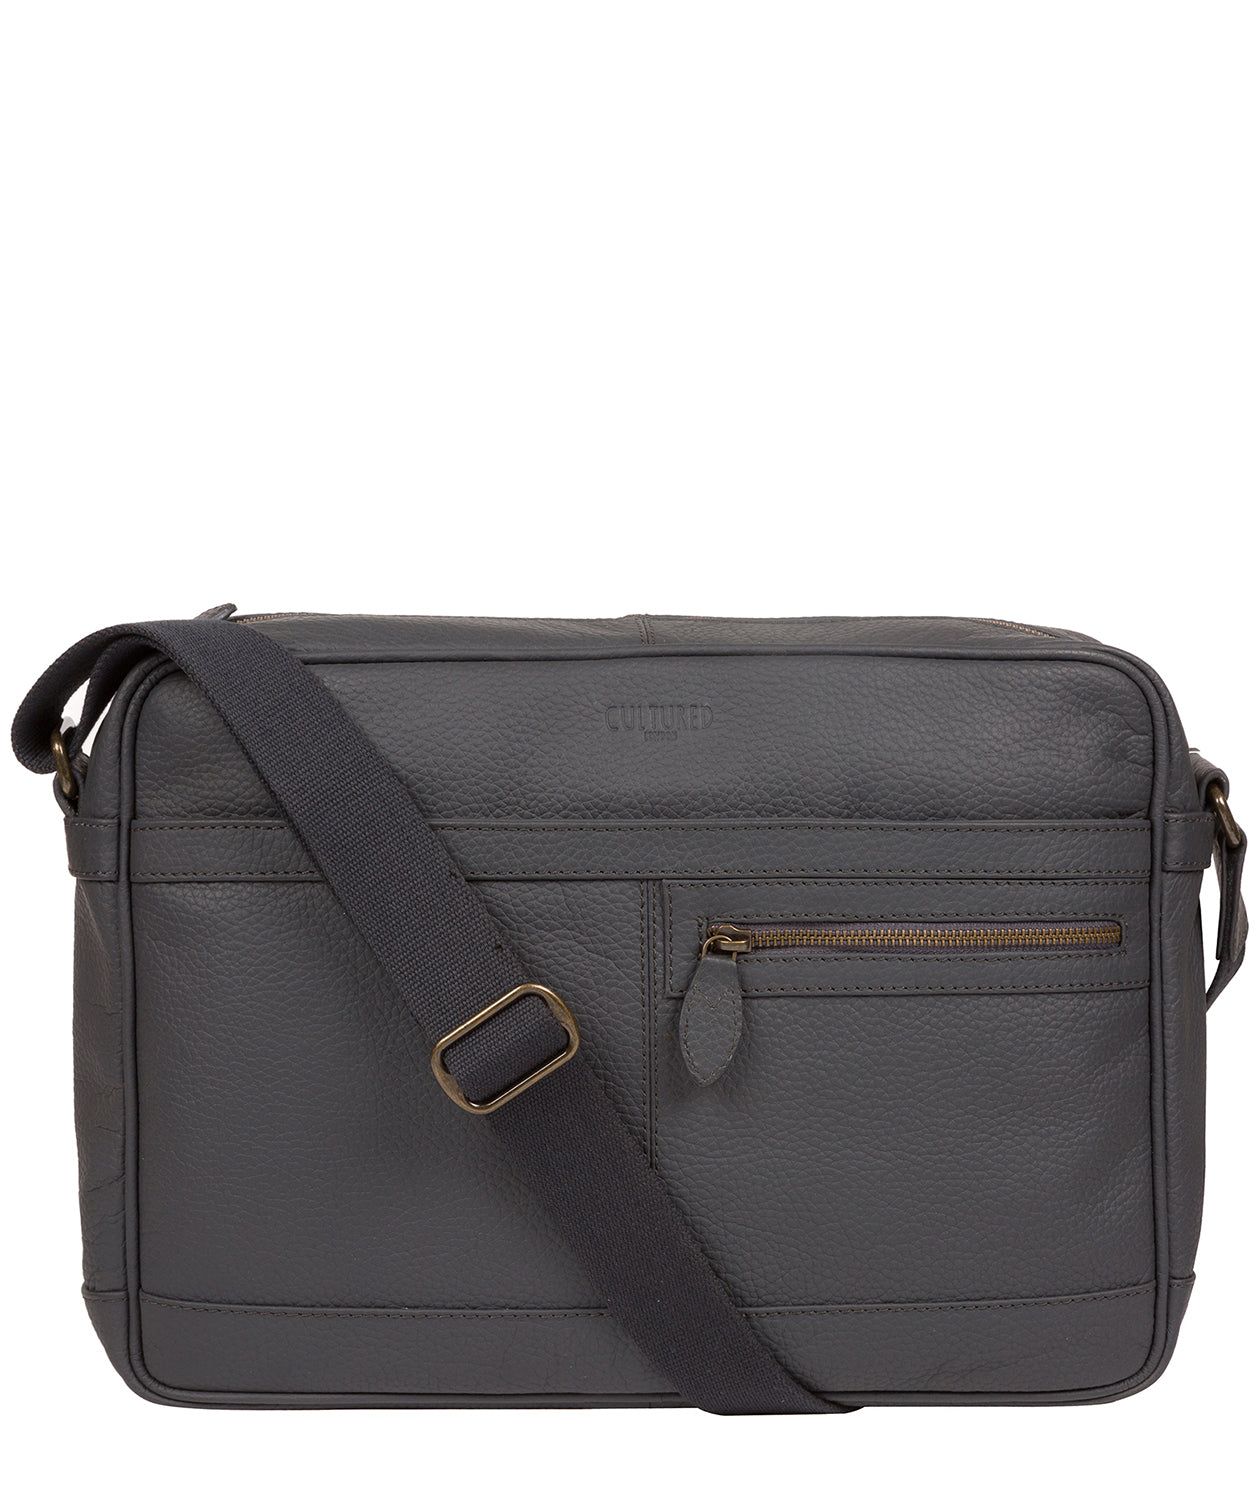 Grey Leather Messenger Bag 'Trek' by Cultured London – Pure Luxuries London